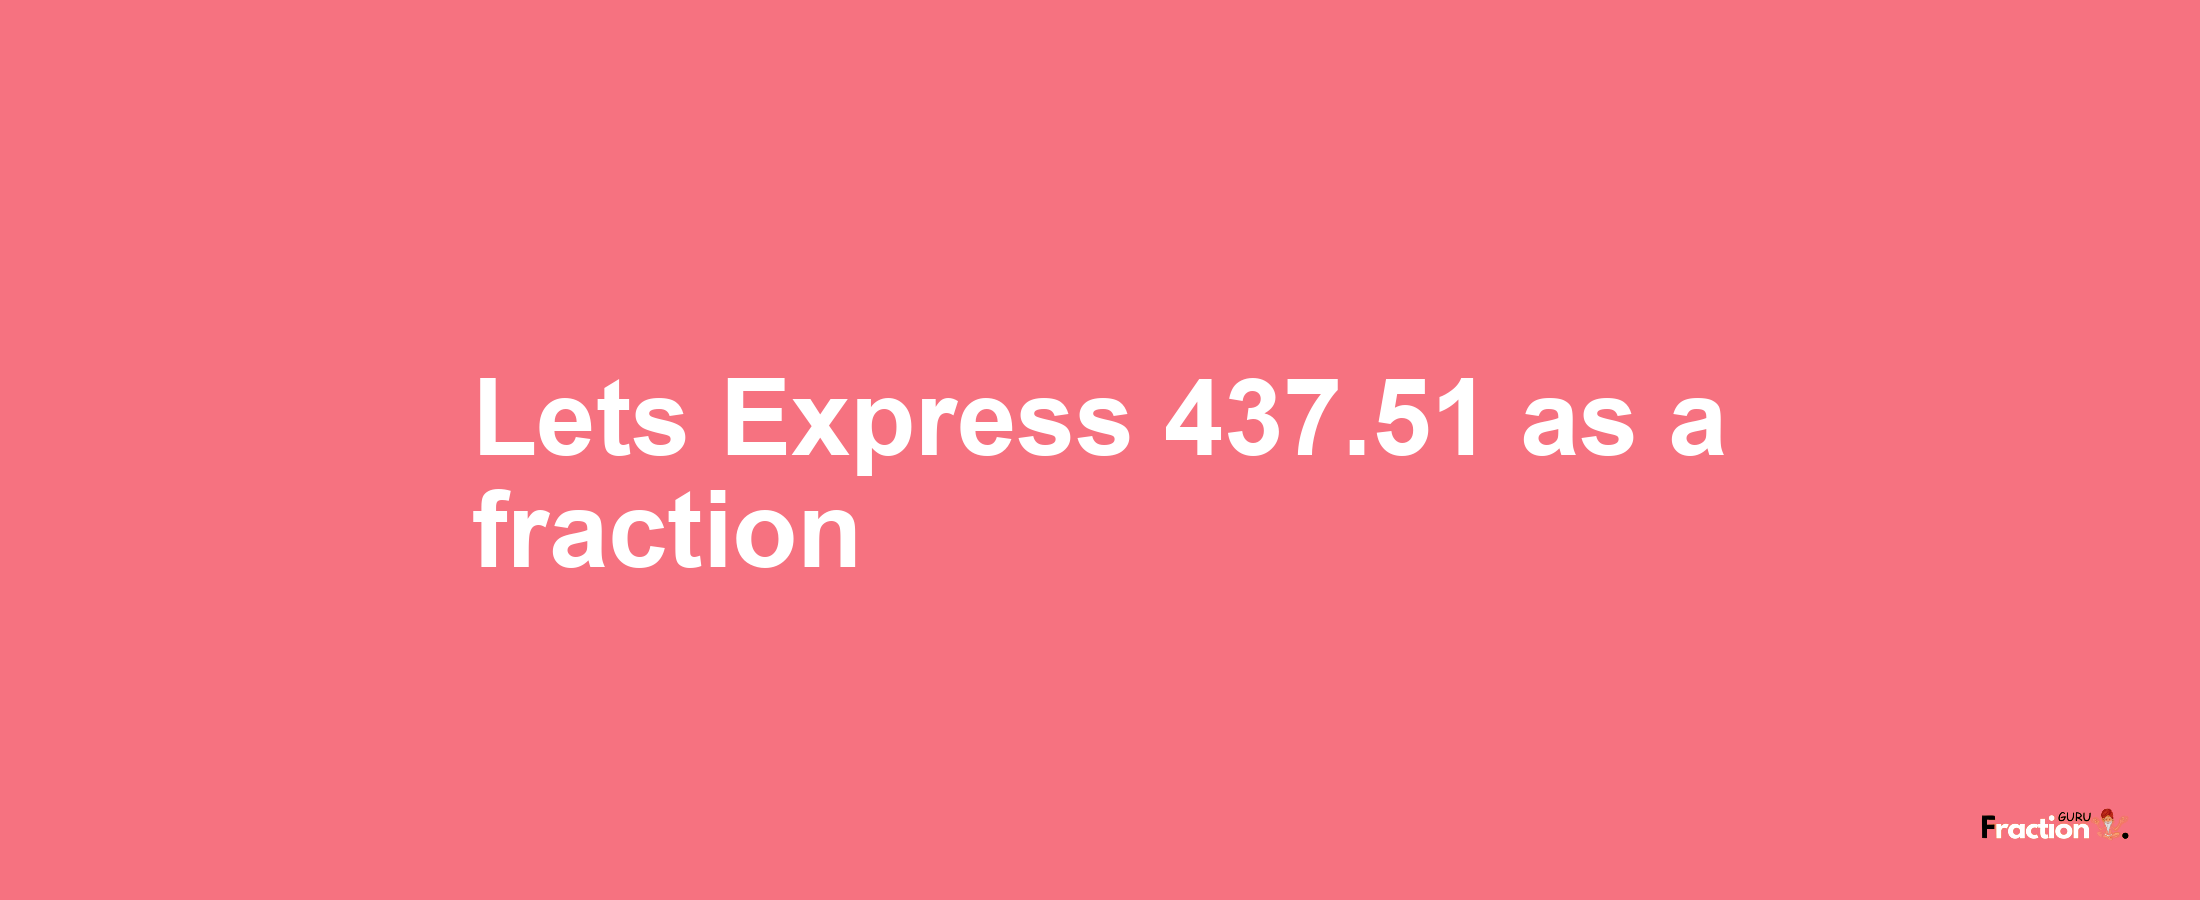 Lets Express 437.51 as afraction